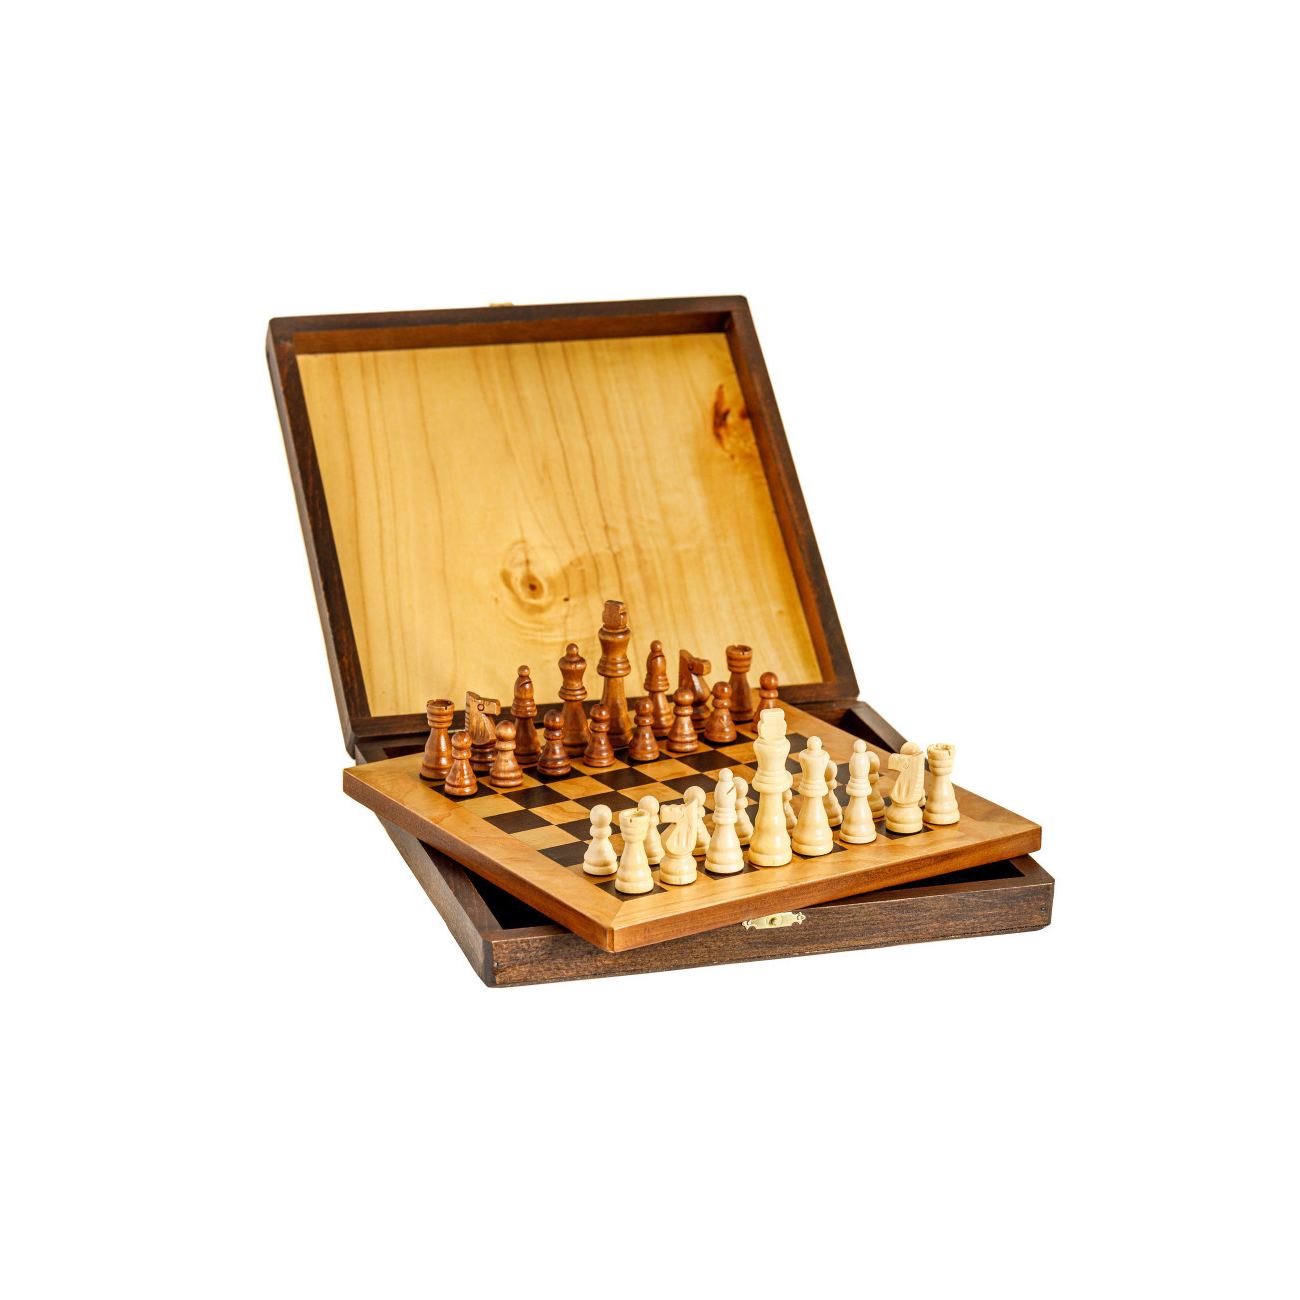 1.33" Squares Details about   Olive wood & Wenge handcrafted chess board in Greece 